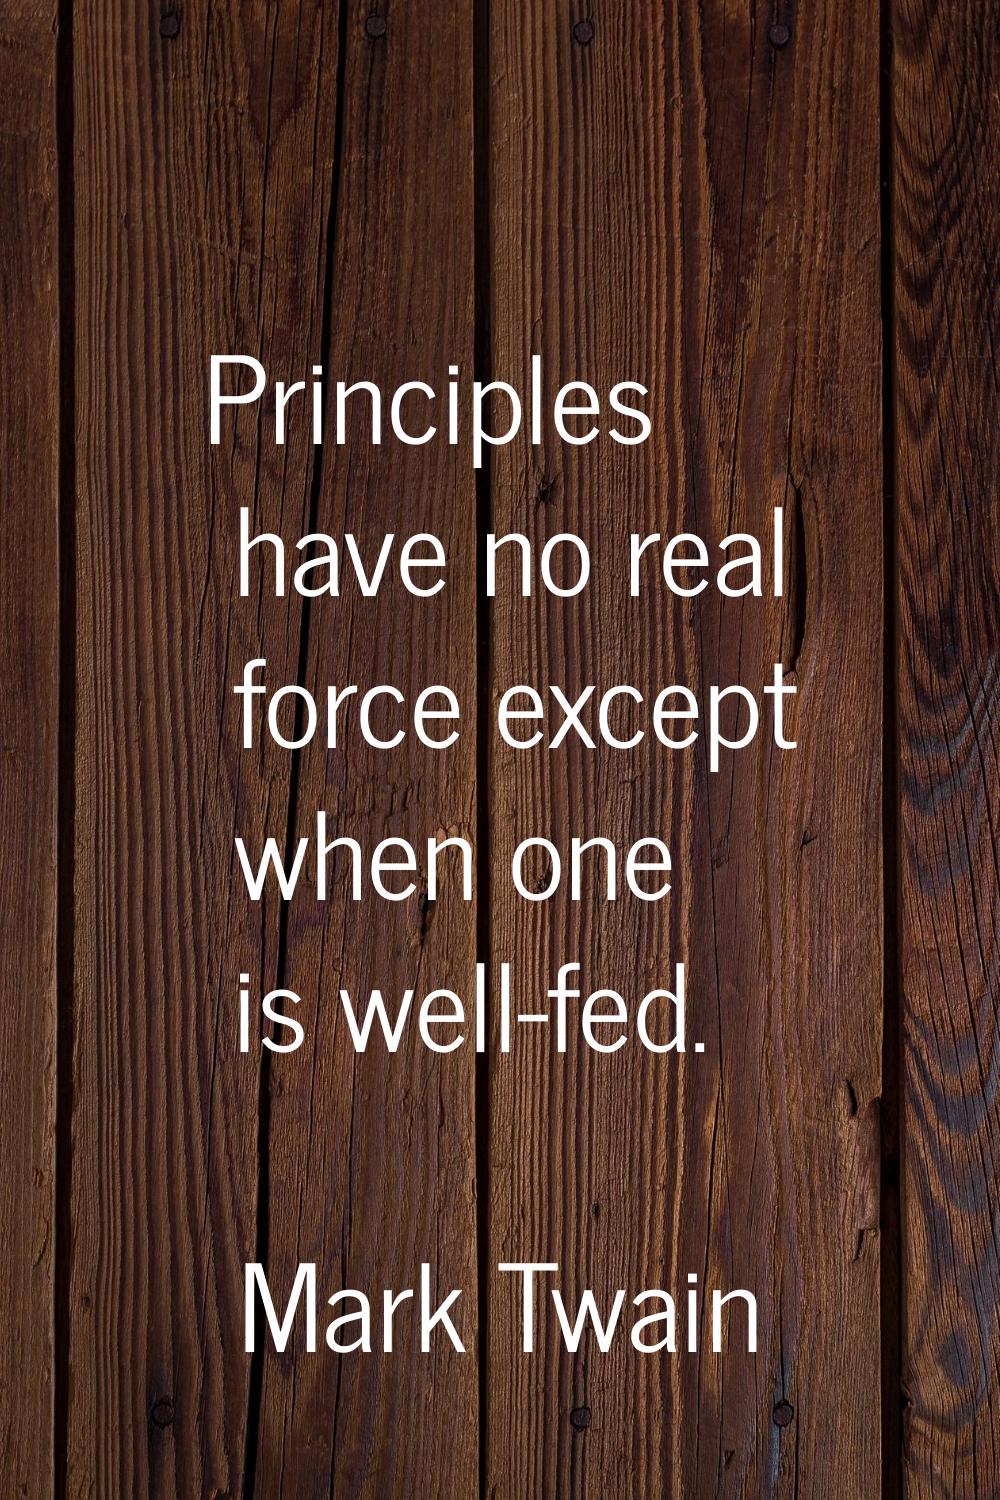 Principles have no real force except when one is well-fed.